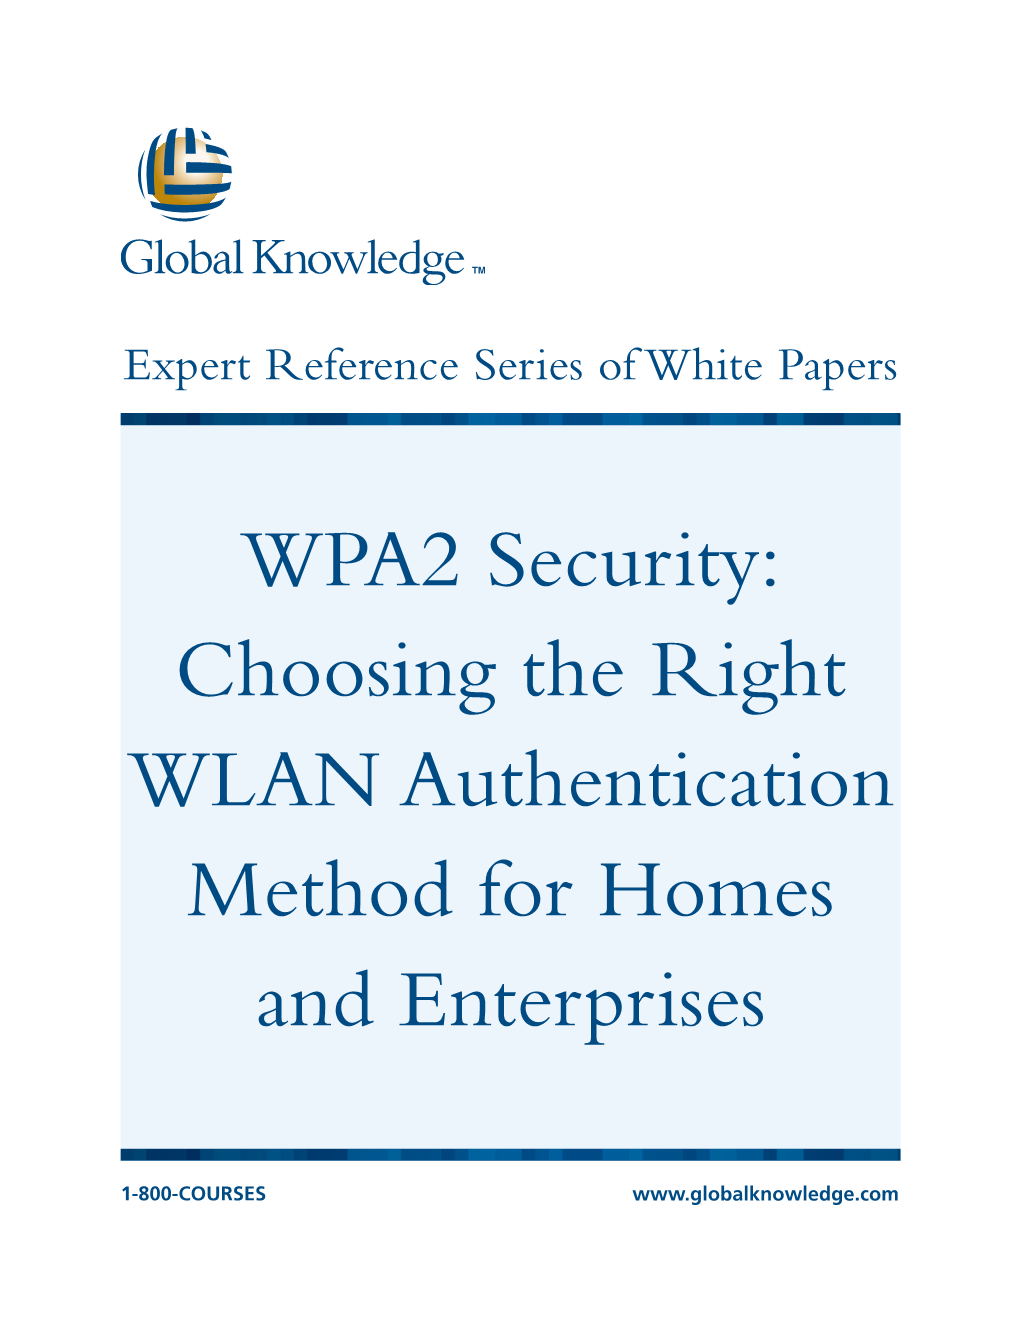 WPA2 Security: Choosing the Right WLAN Authentication Method for Homes and Enterprises